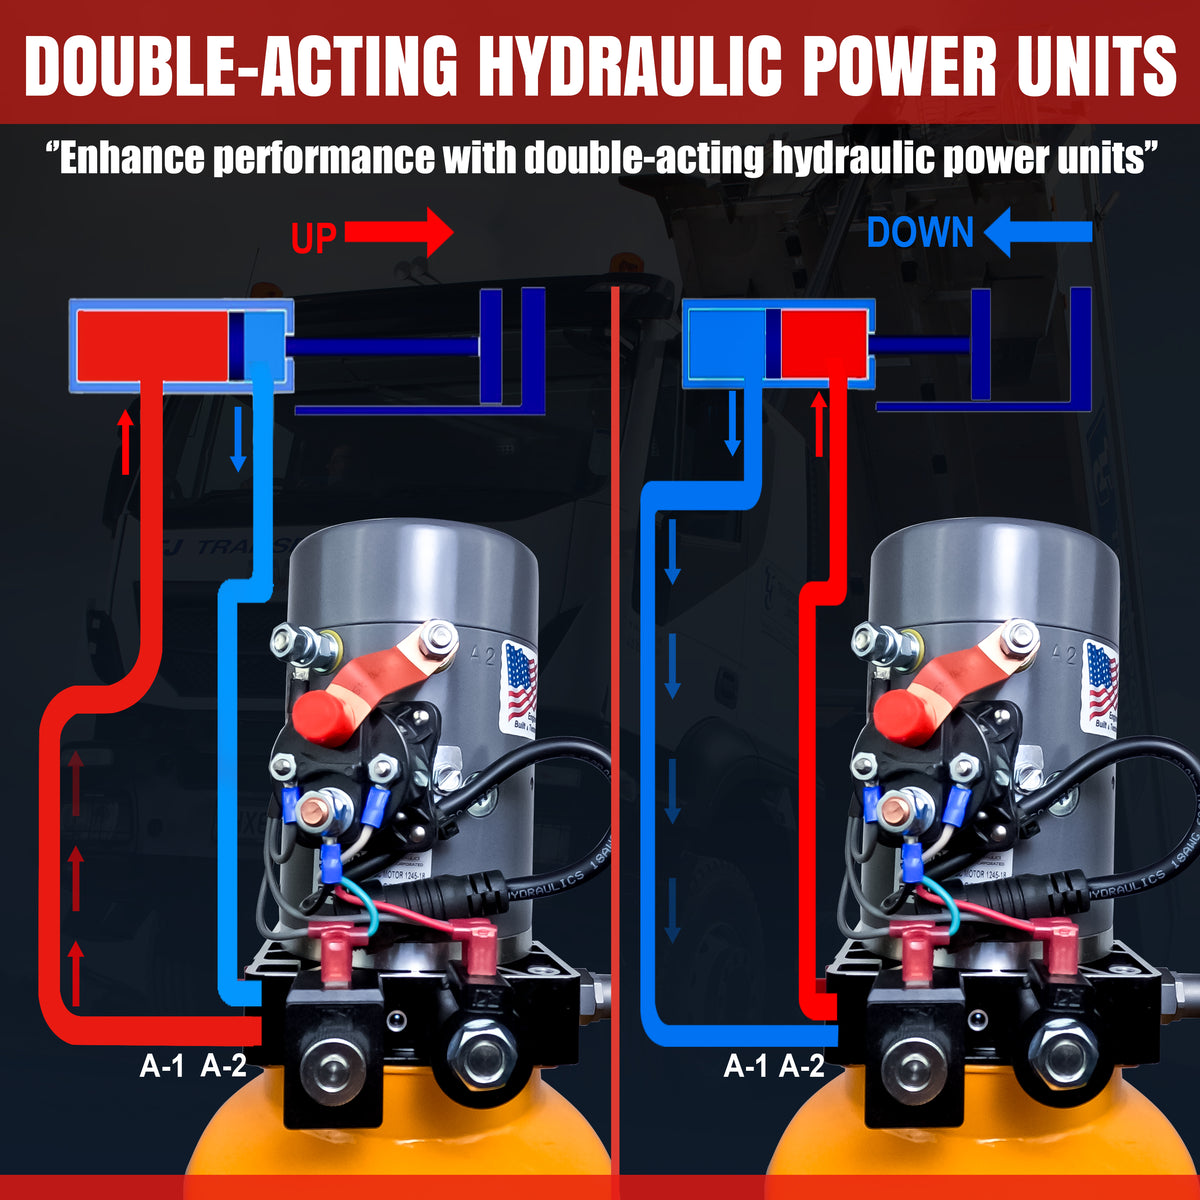 KTI 12V Double-Acting Hydraulic Pump - Steel Reservoir, showcasing a detailed diagram of the pump unit, emphasizing its robust and compact design for heavy-duty hydraulic applications.